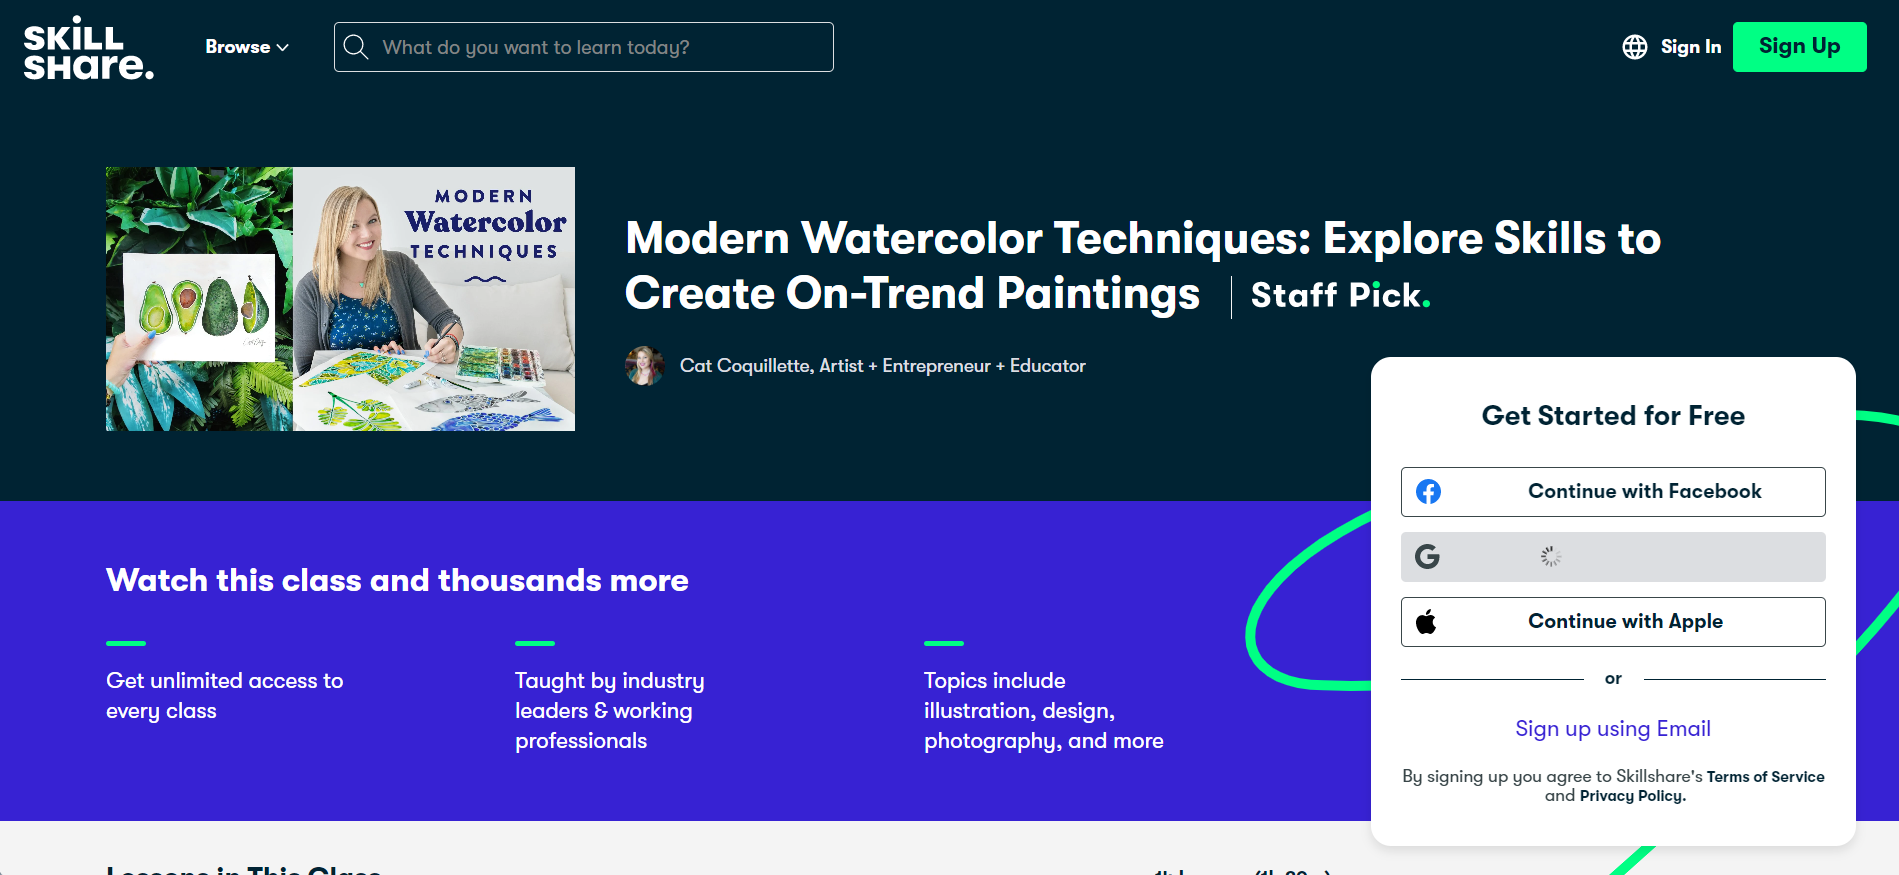 Modern Watercolor Techniques Explore Skills to Create On-trend Paintings